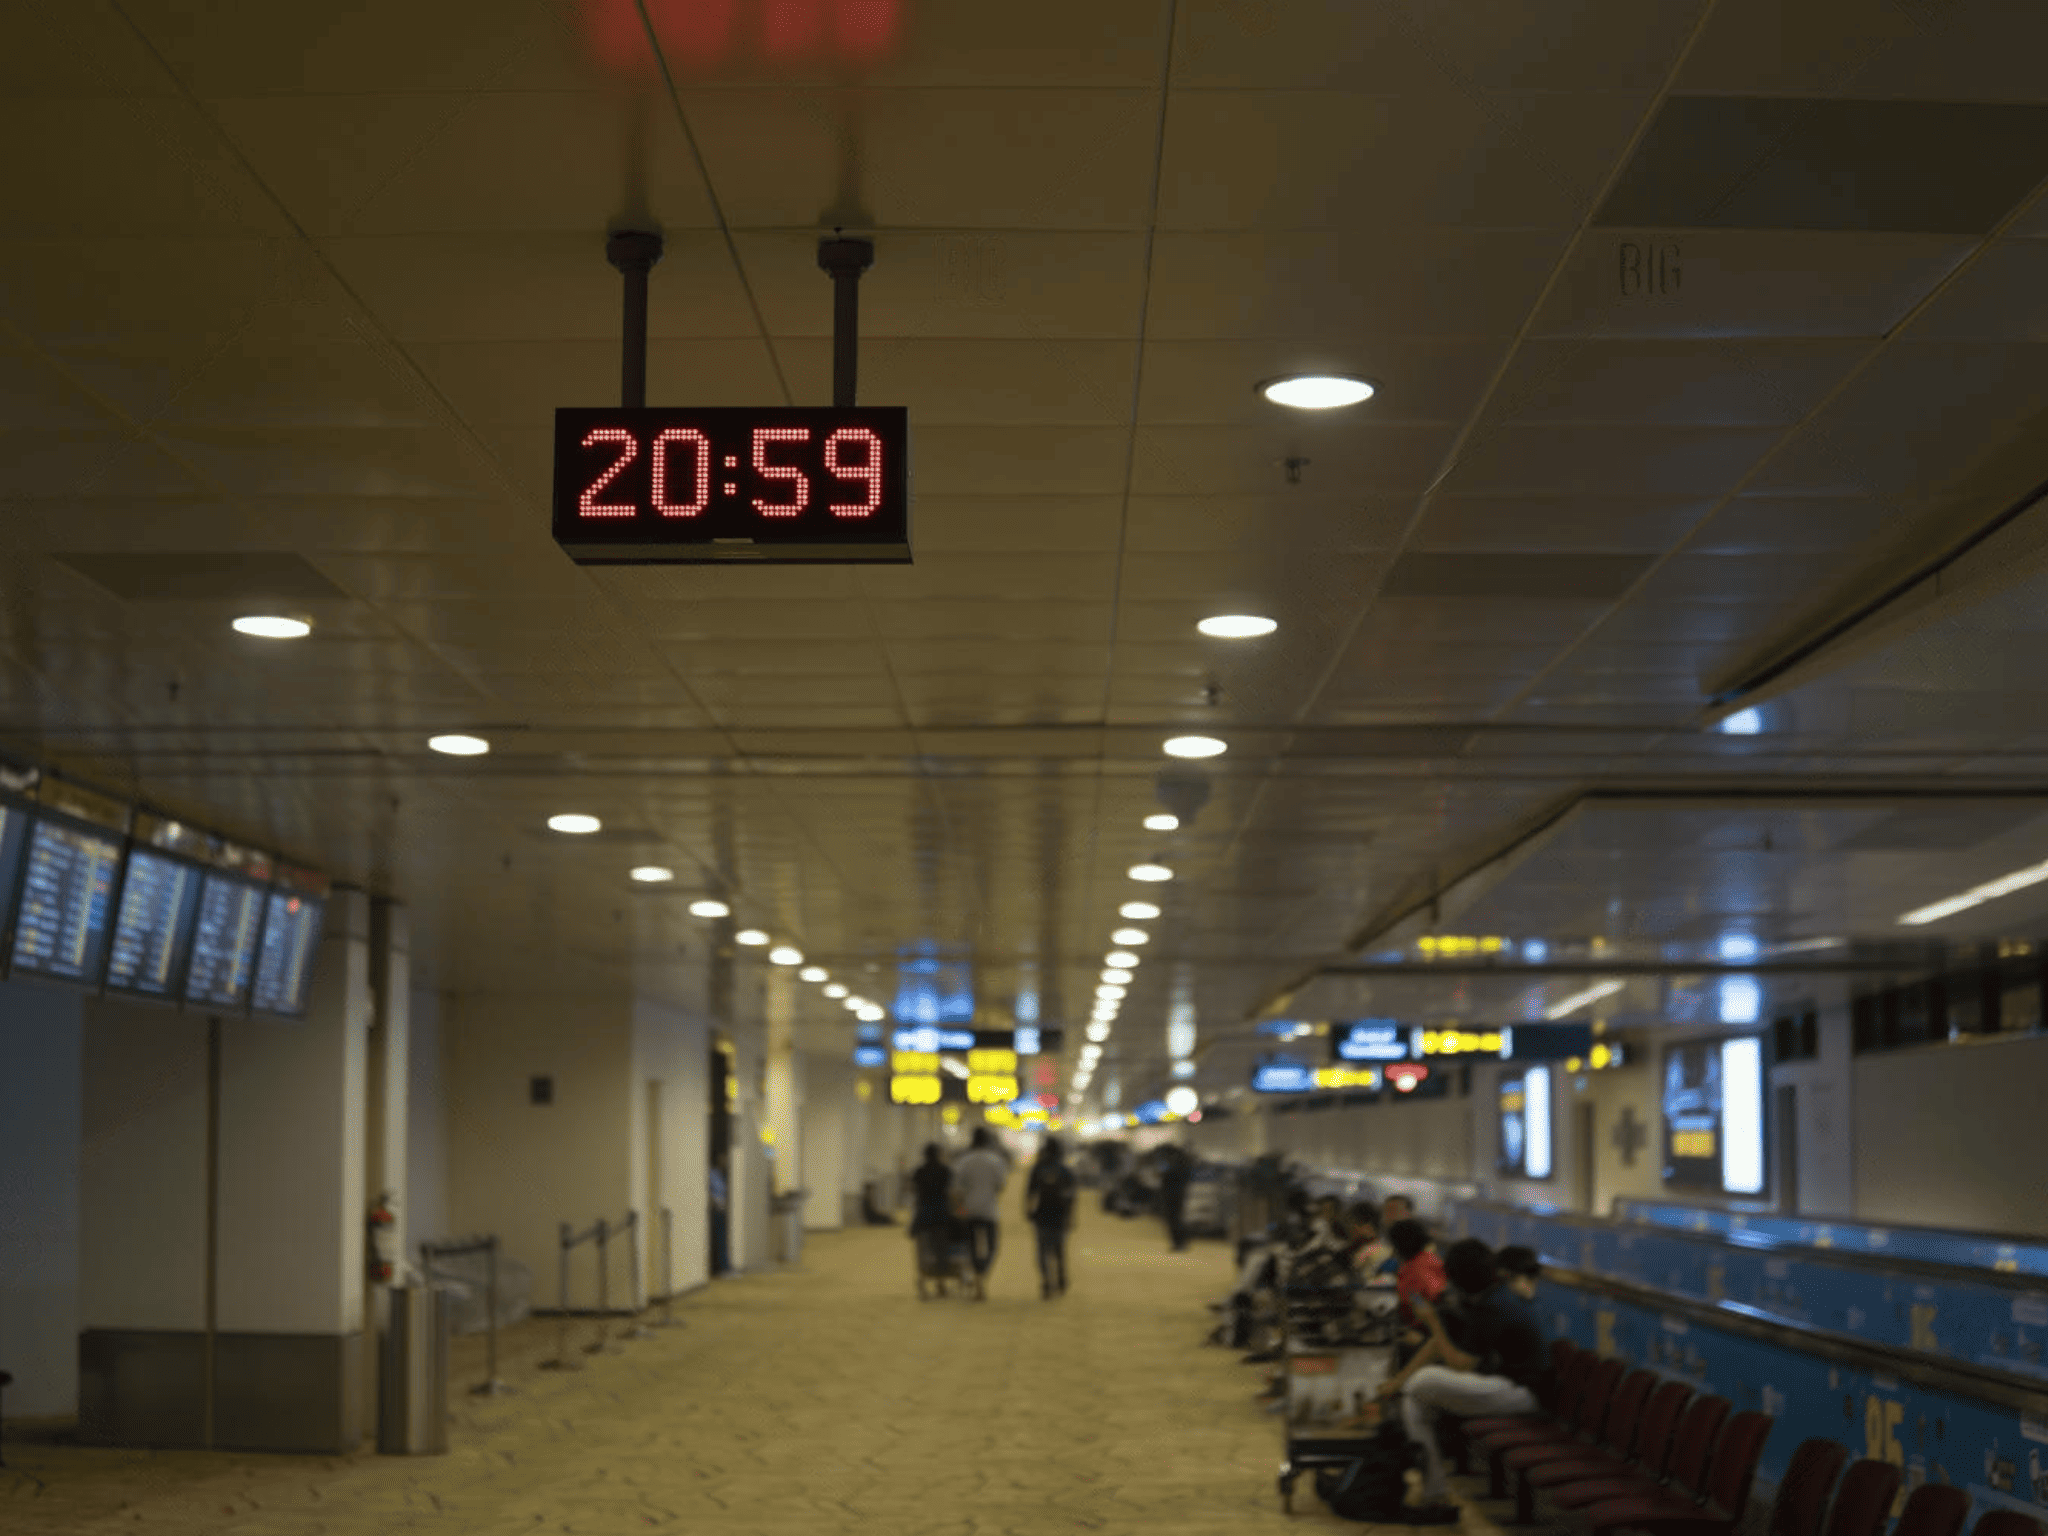 LED Digital Clocks attached on the ceiling of the airport.